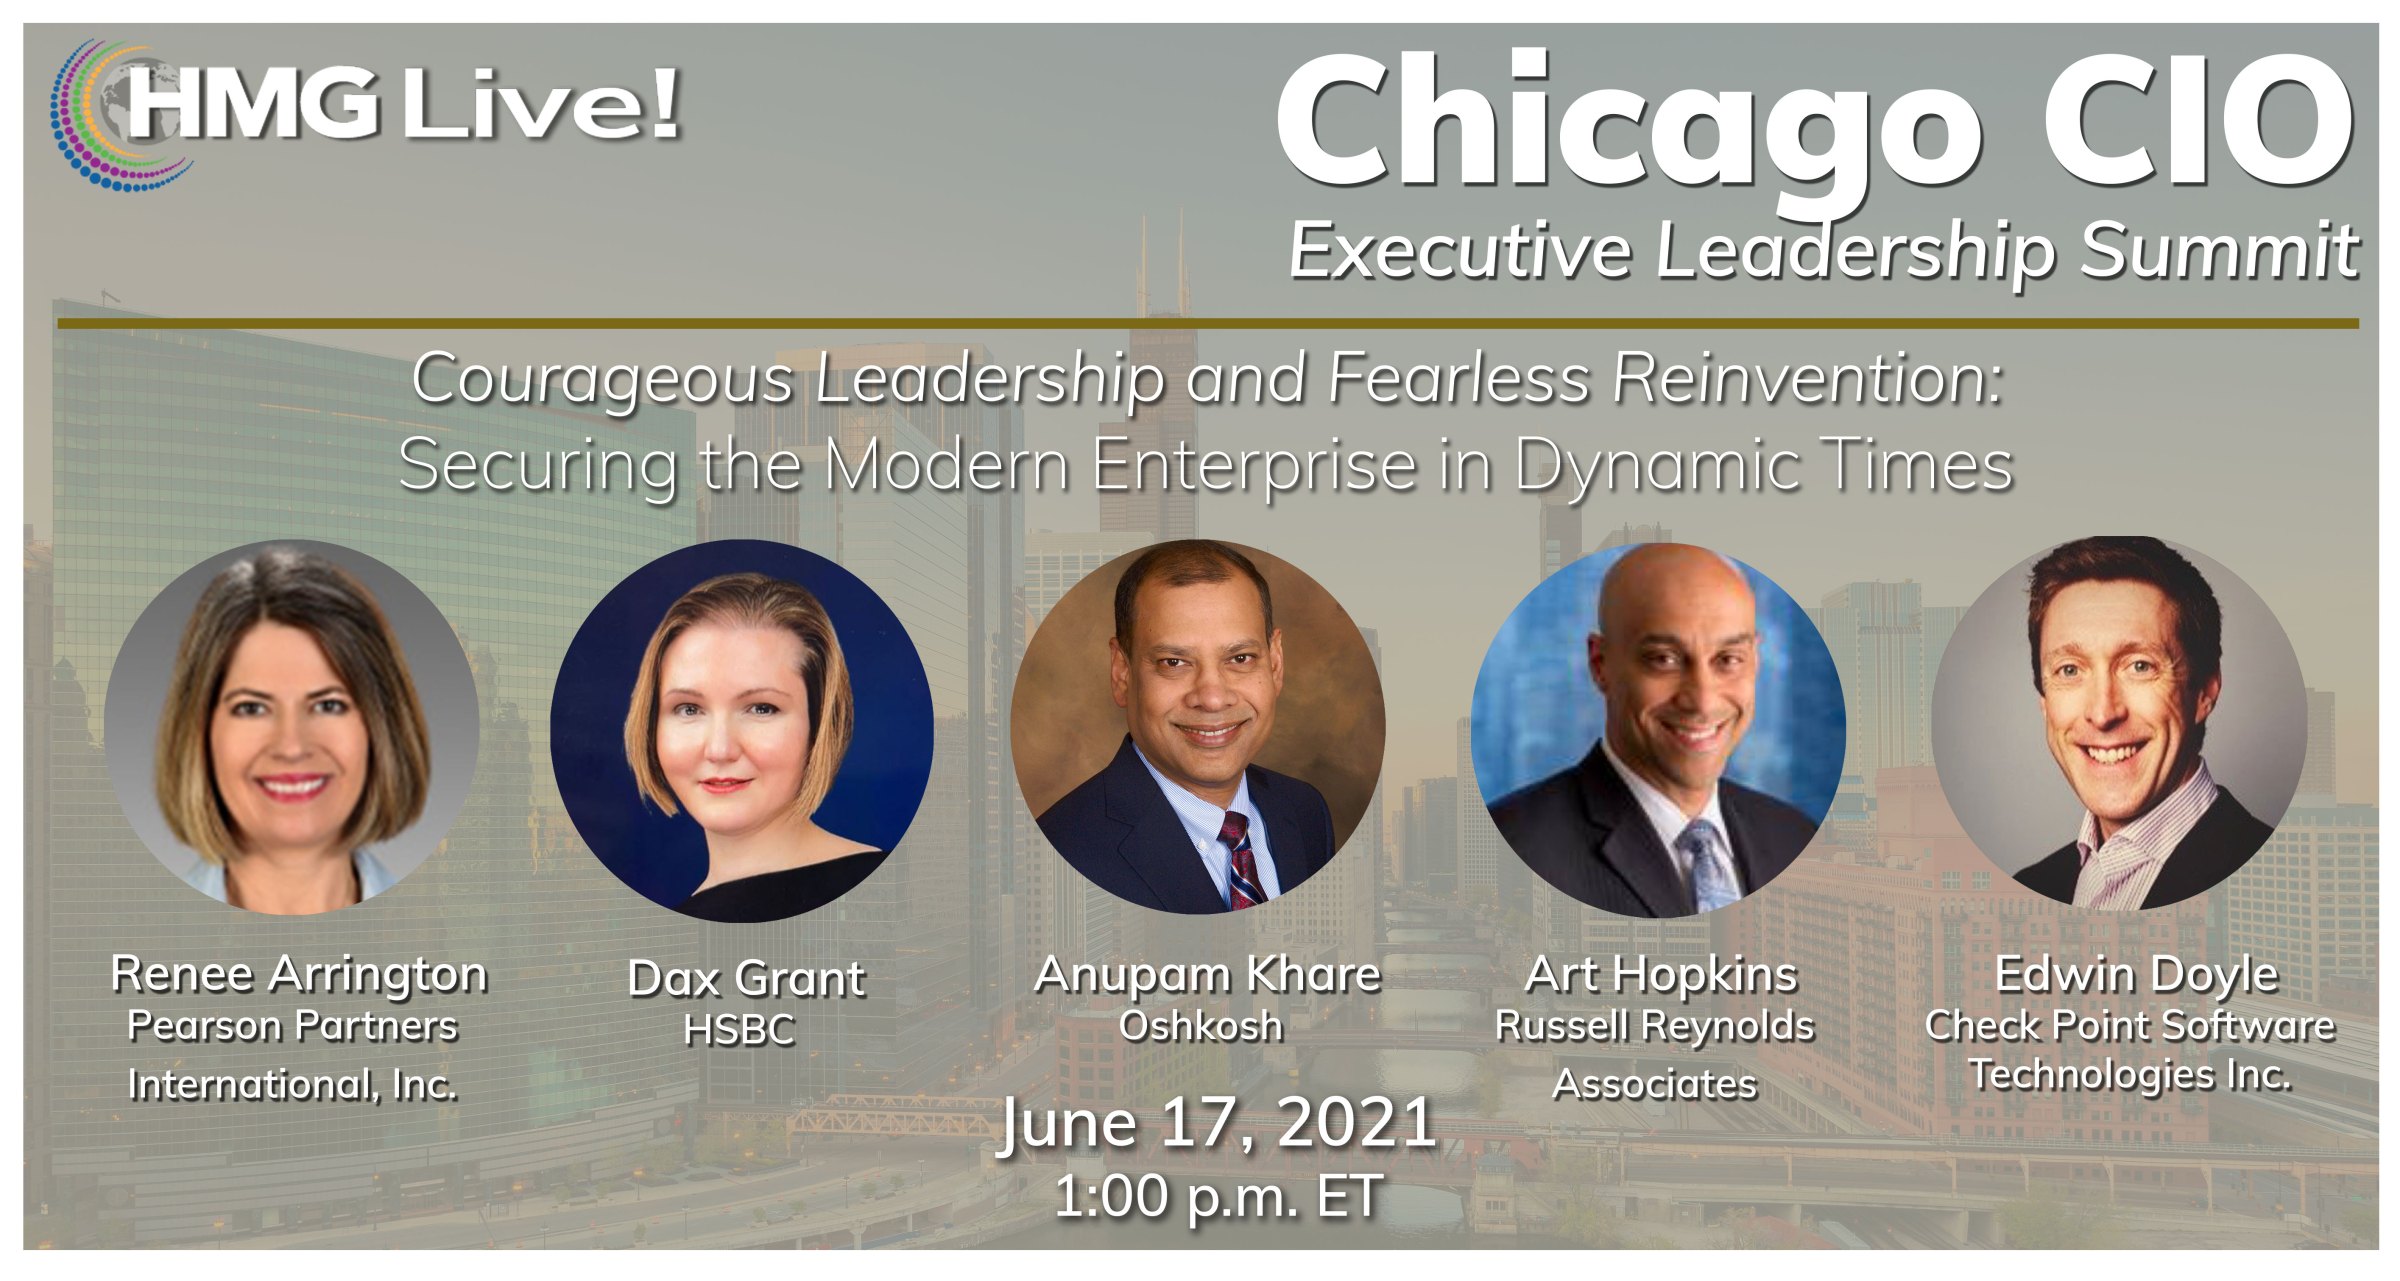 CIO Leadership: Building Trust at the Executive Level Will Drive the Discussion at the 2021 HMG Live! Chicago CIO Executive Leadership Summit on June 17